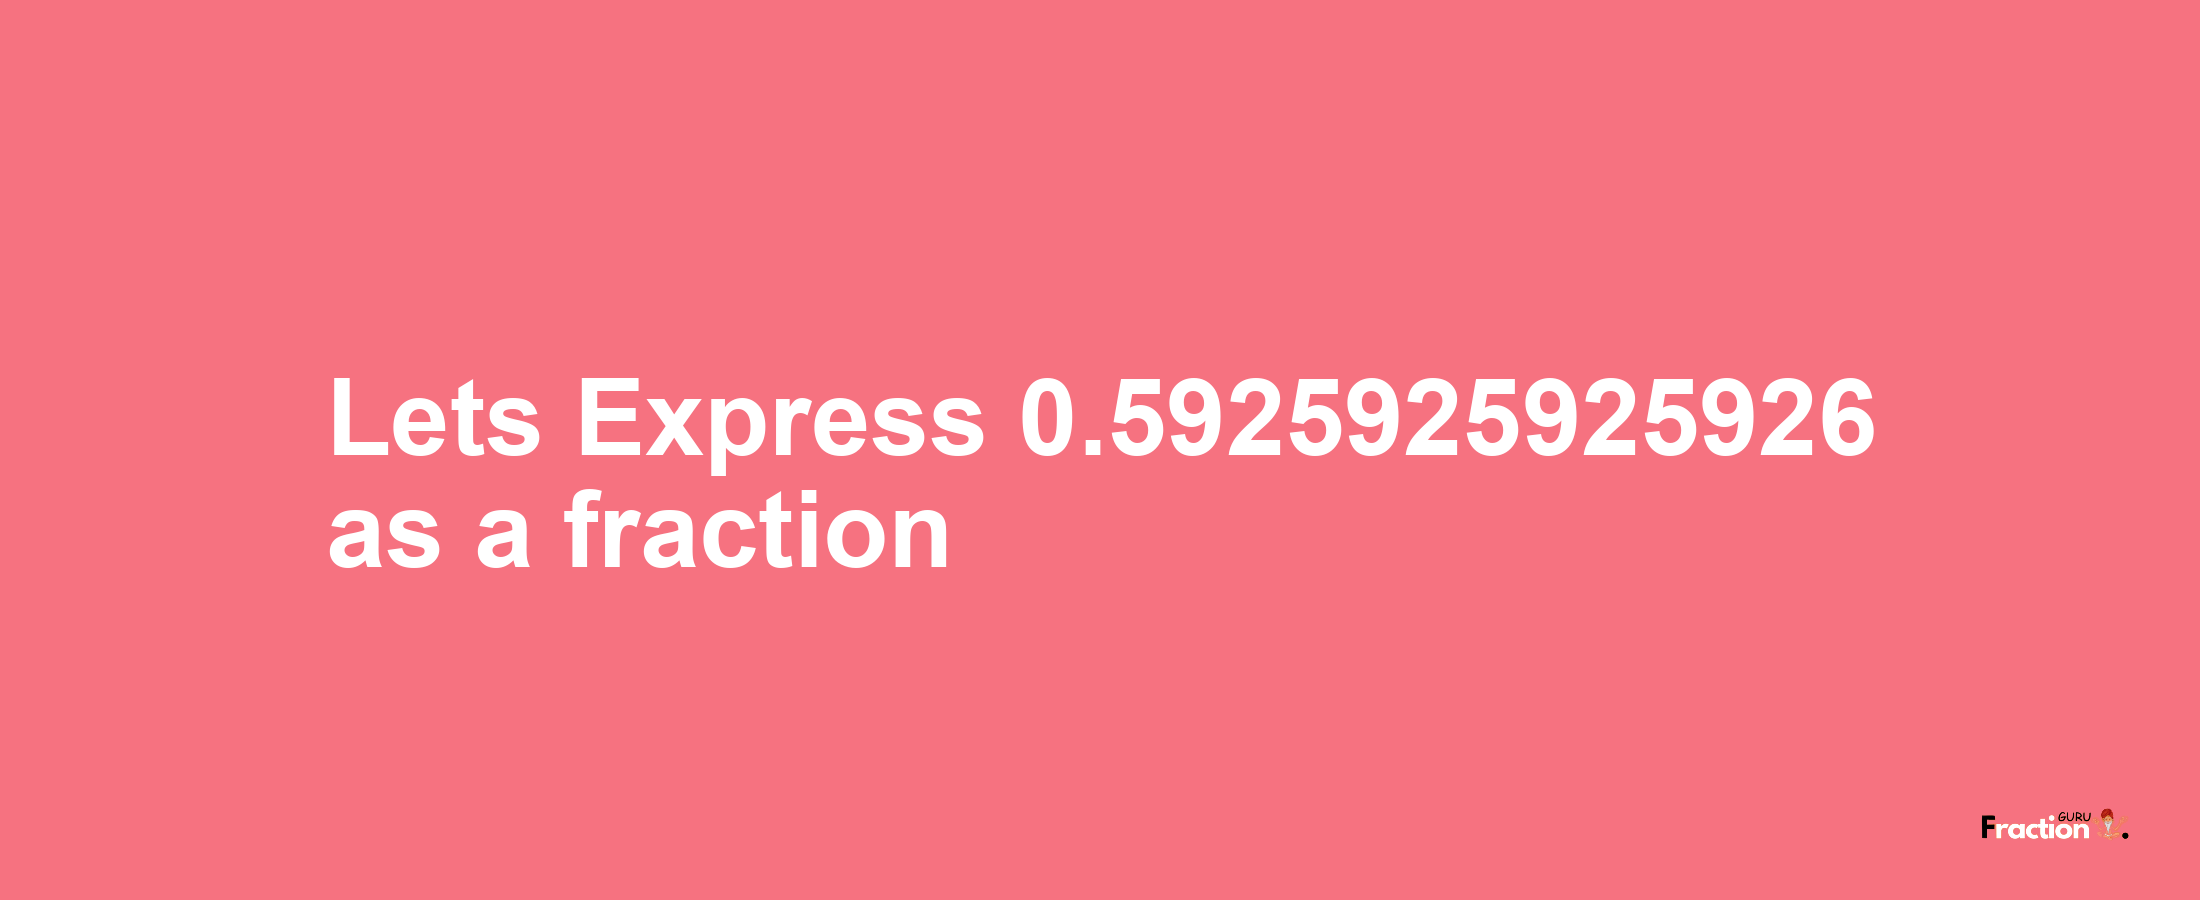 Lets Express 0.5925925925926 as afraction